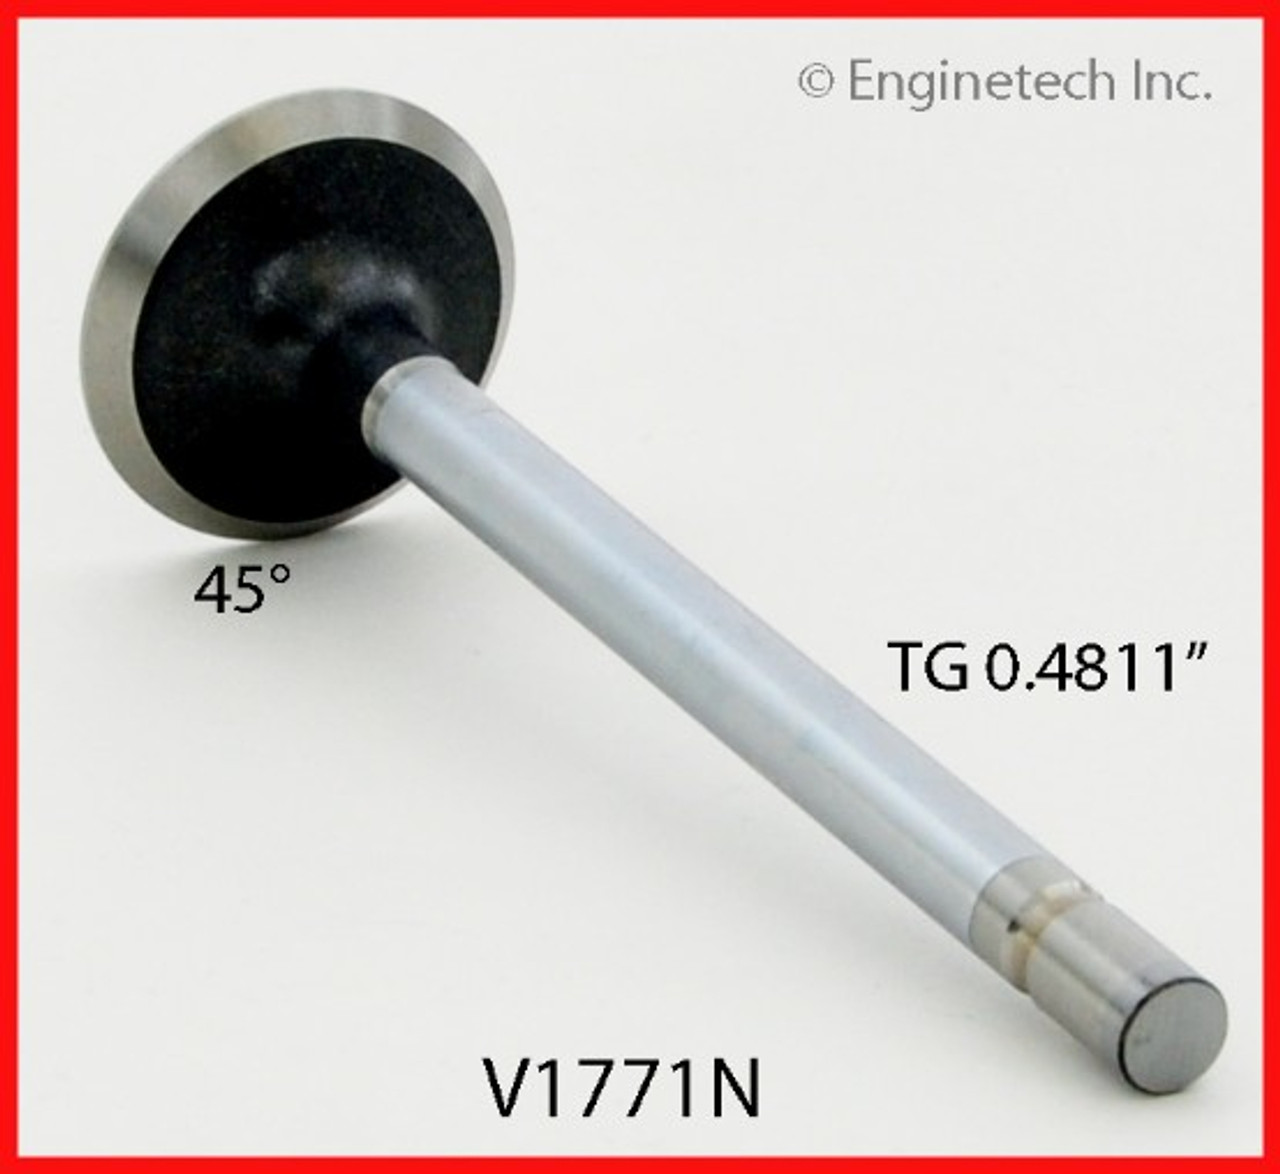 Exhaust Valve - 1985 Lincoln Continental 5.0L (V1771N.K515)